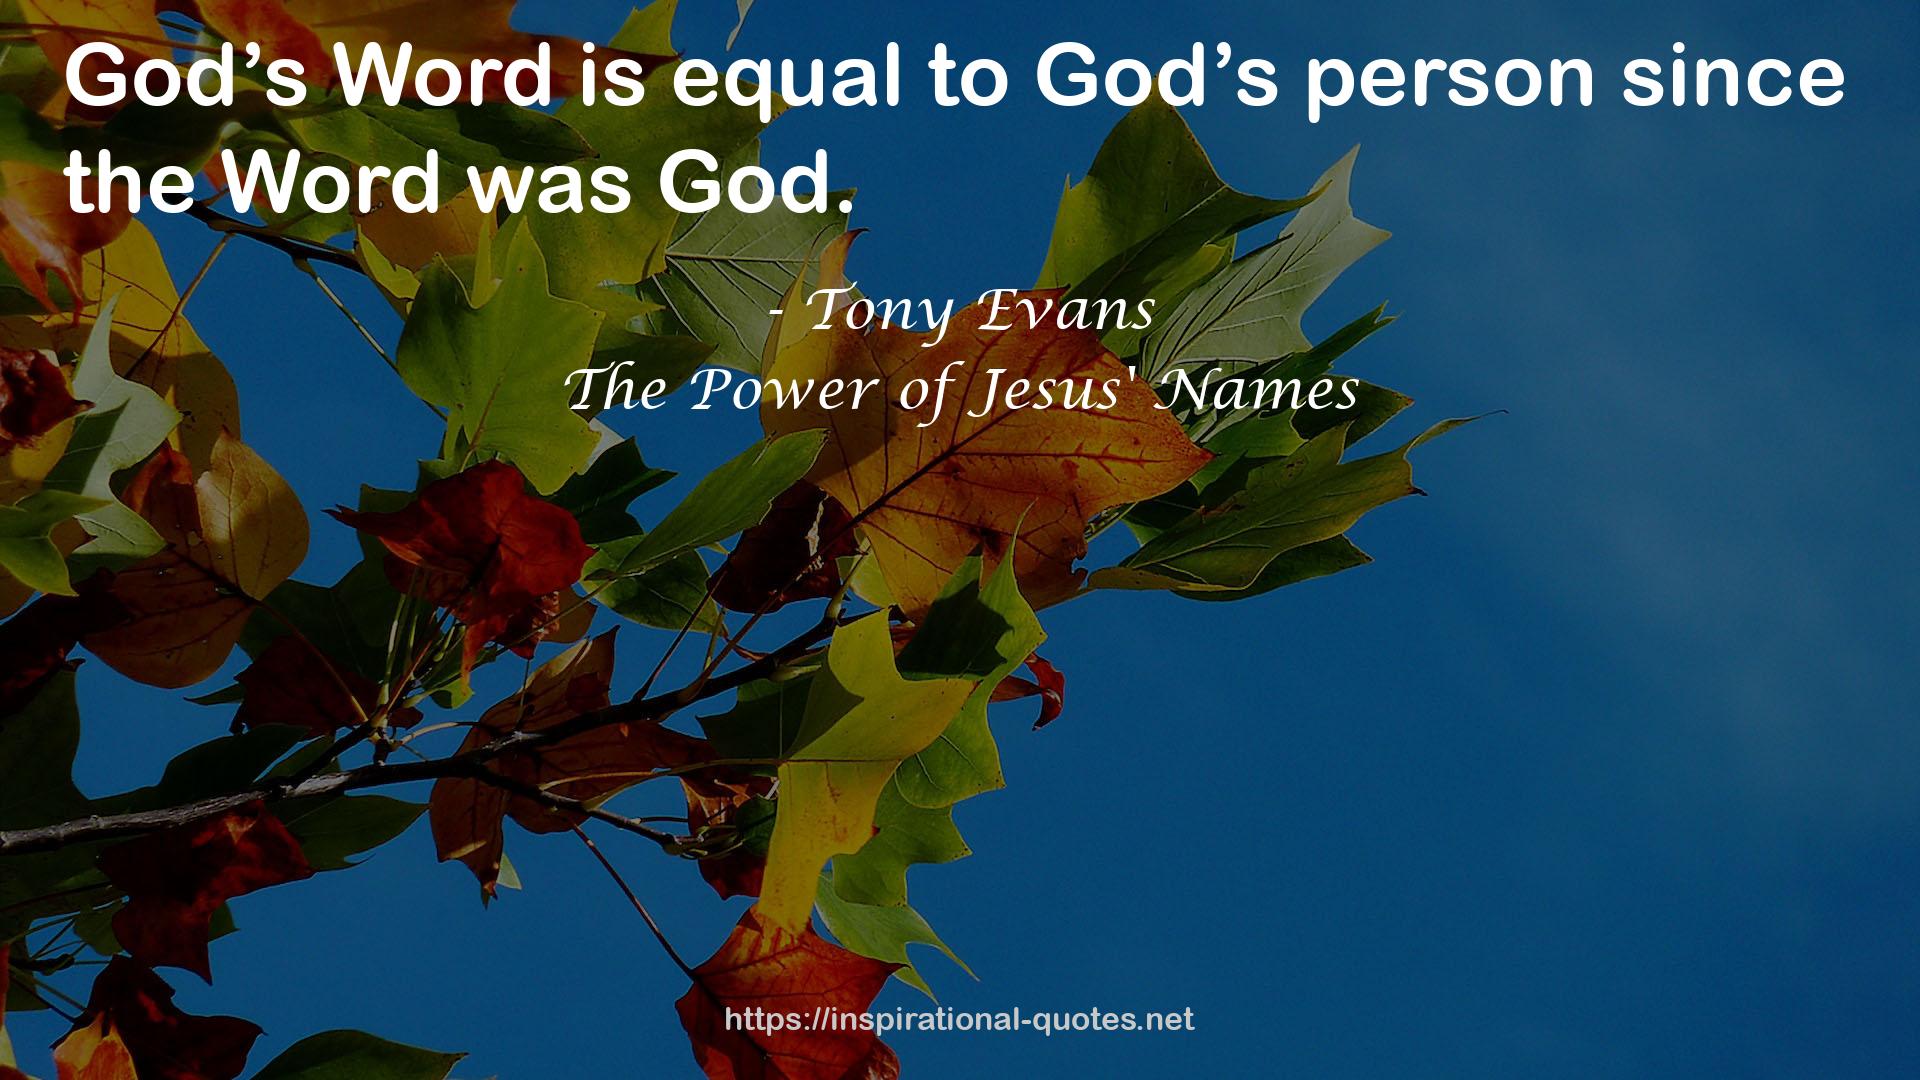 The Power of Jesus' Names QUOTES